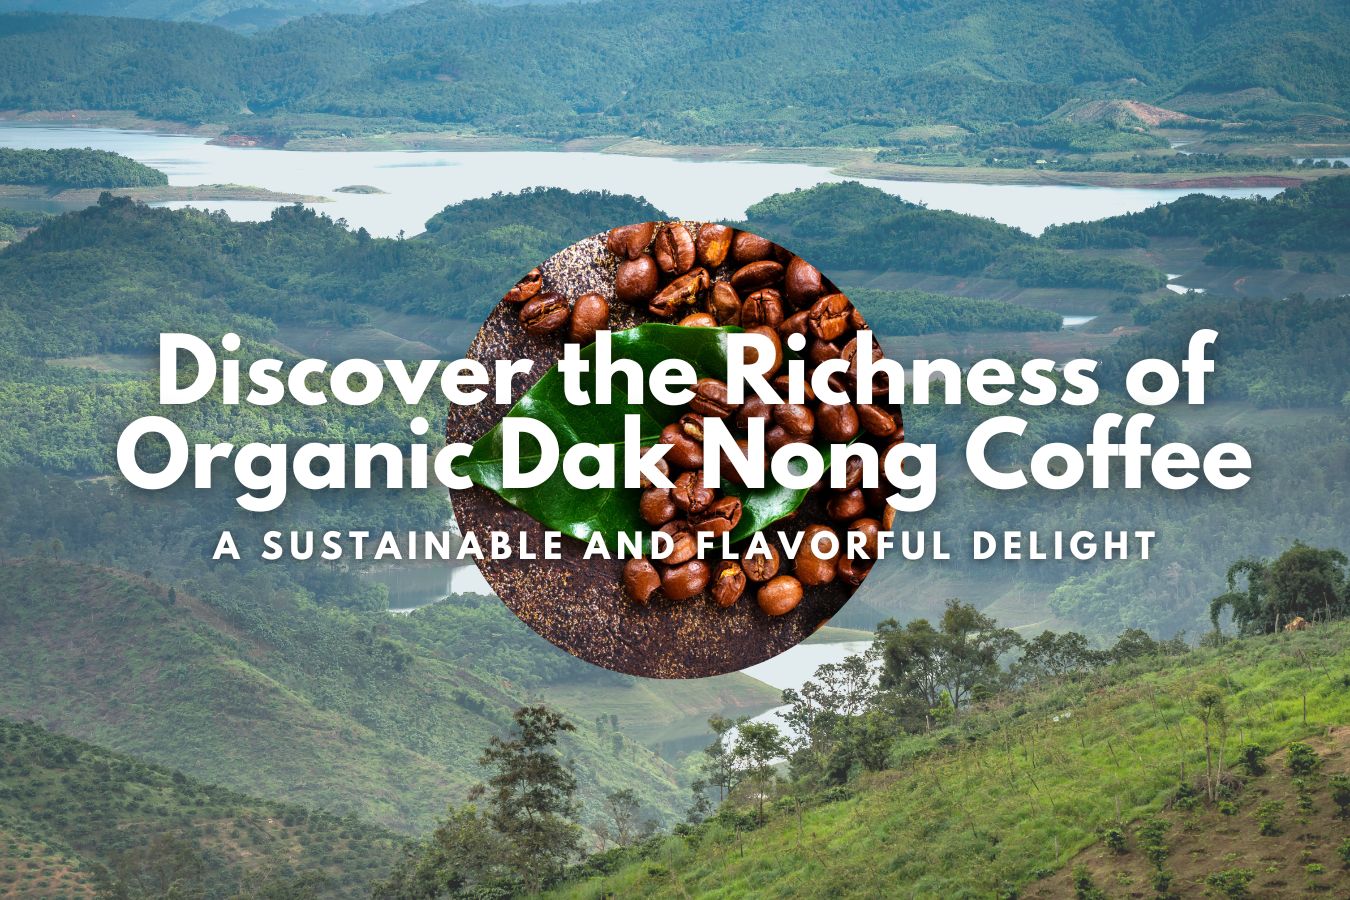 Discover the Richness of Organic Dak Nong Coffee A Sustainable and Flavorful Delight